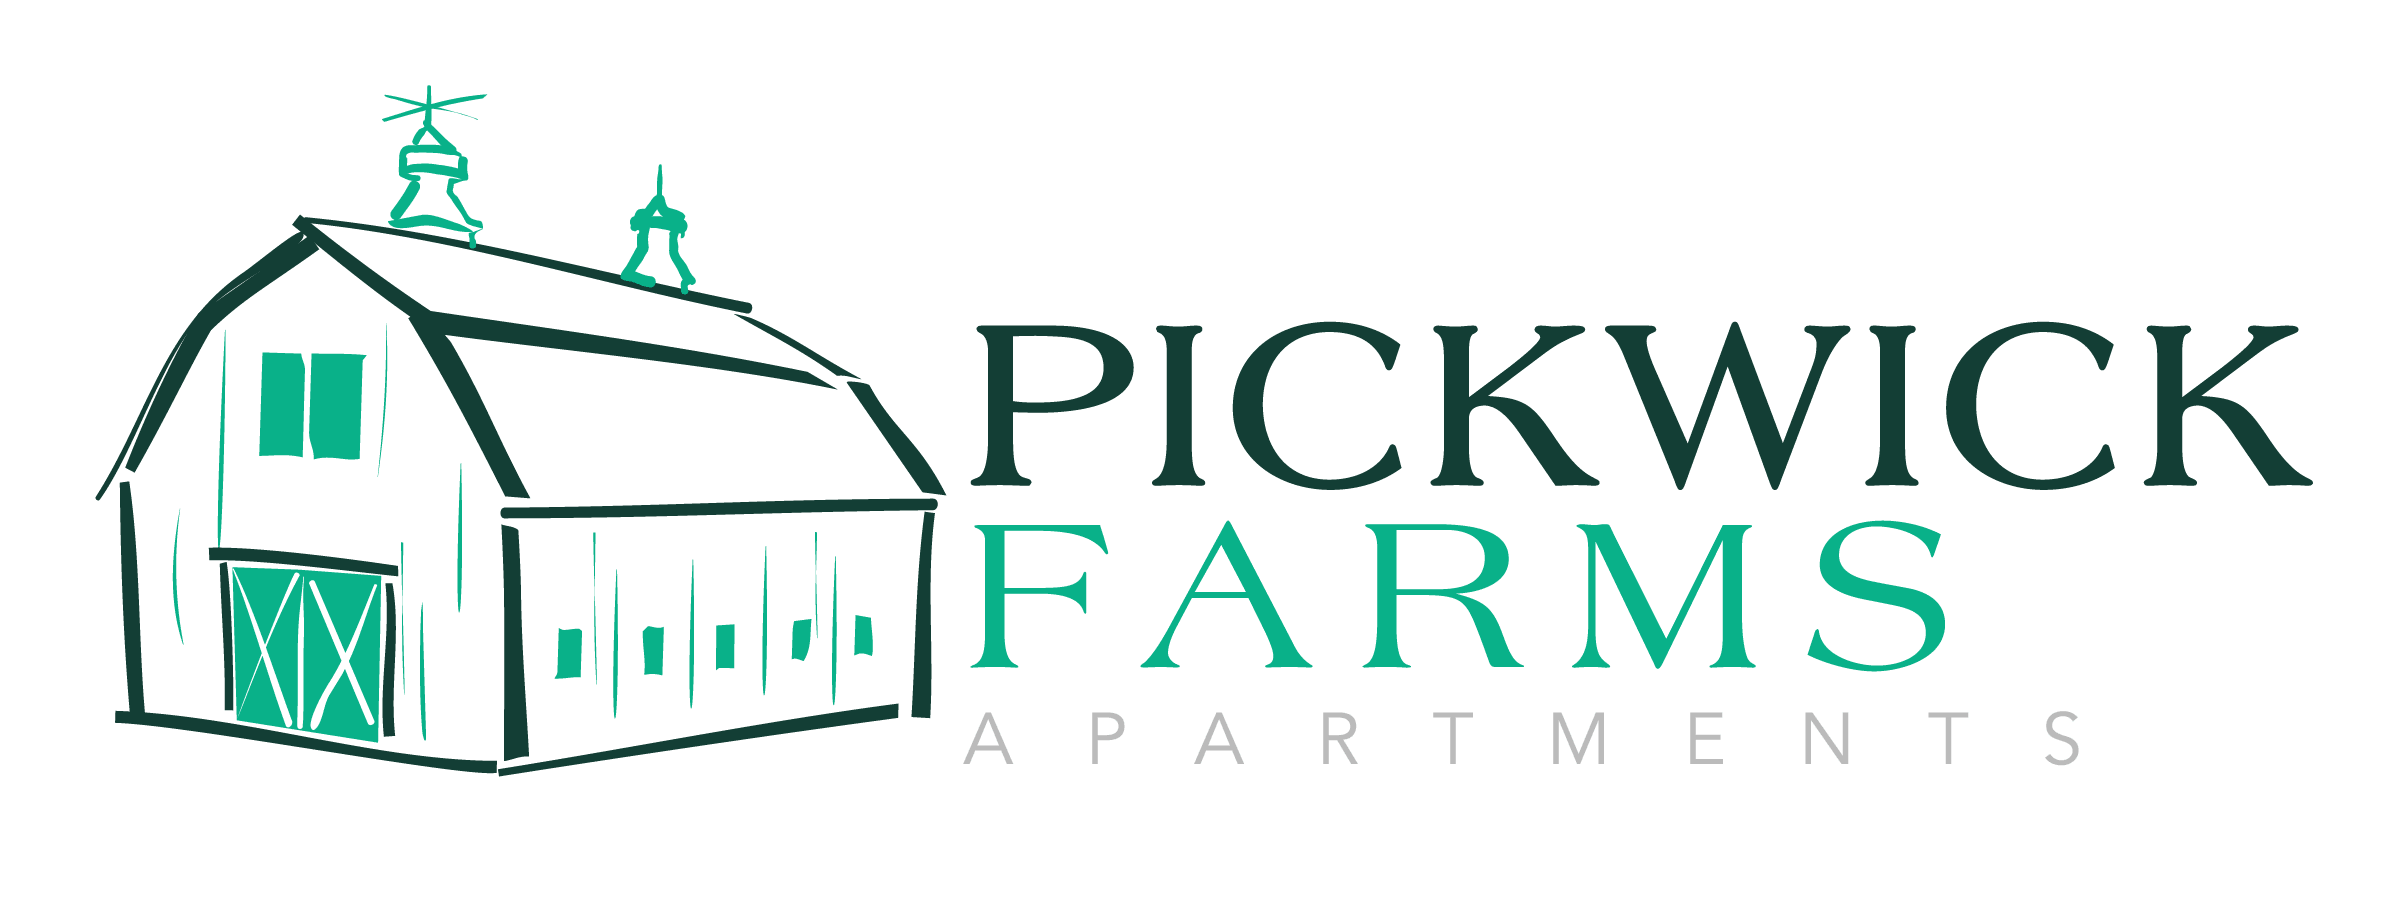 Pickwick Farms Apartments: Apartments in North Indianapolis